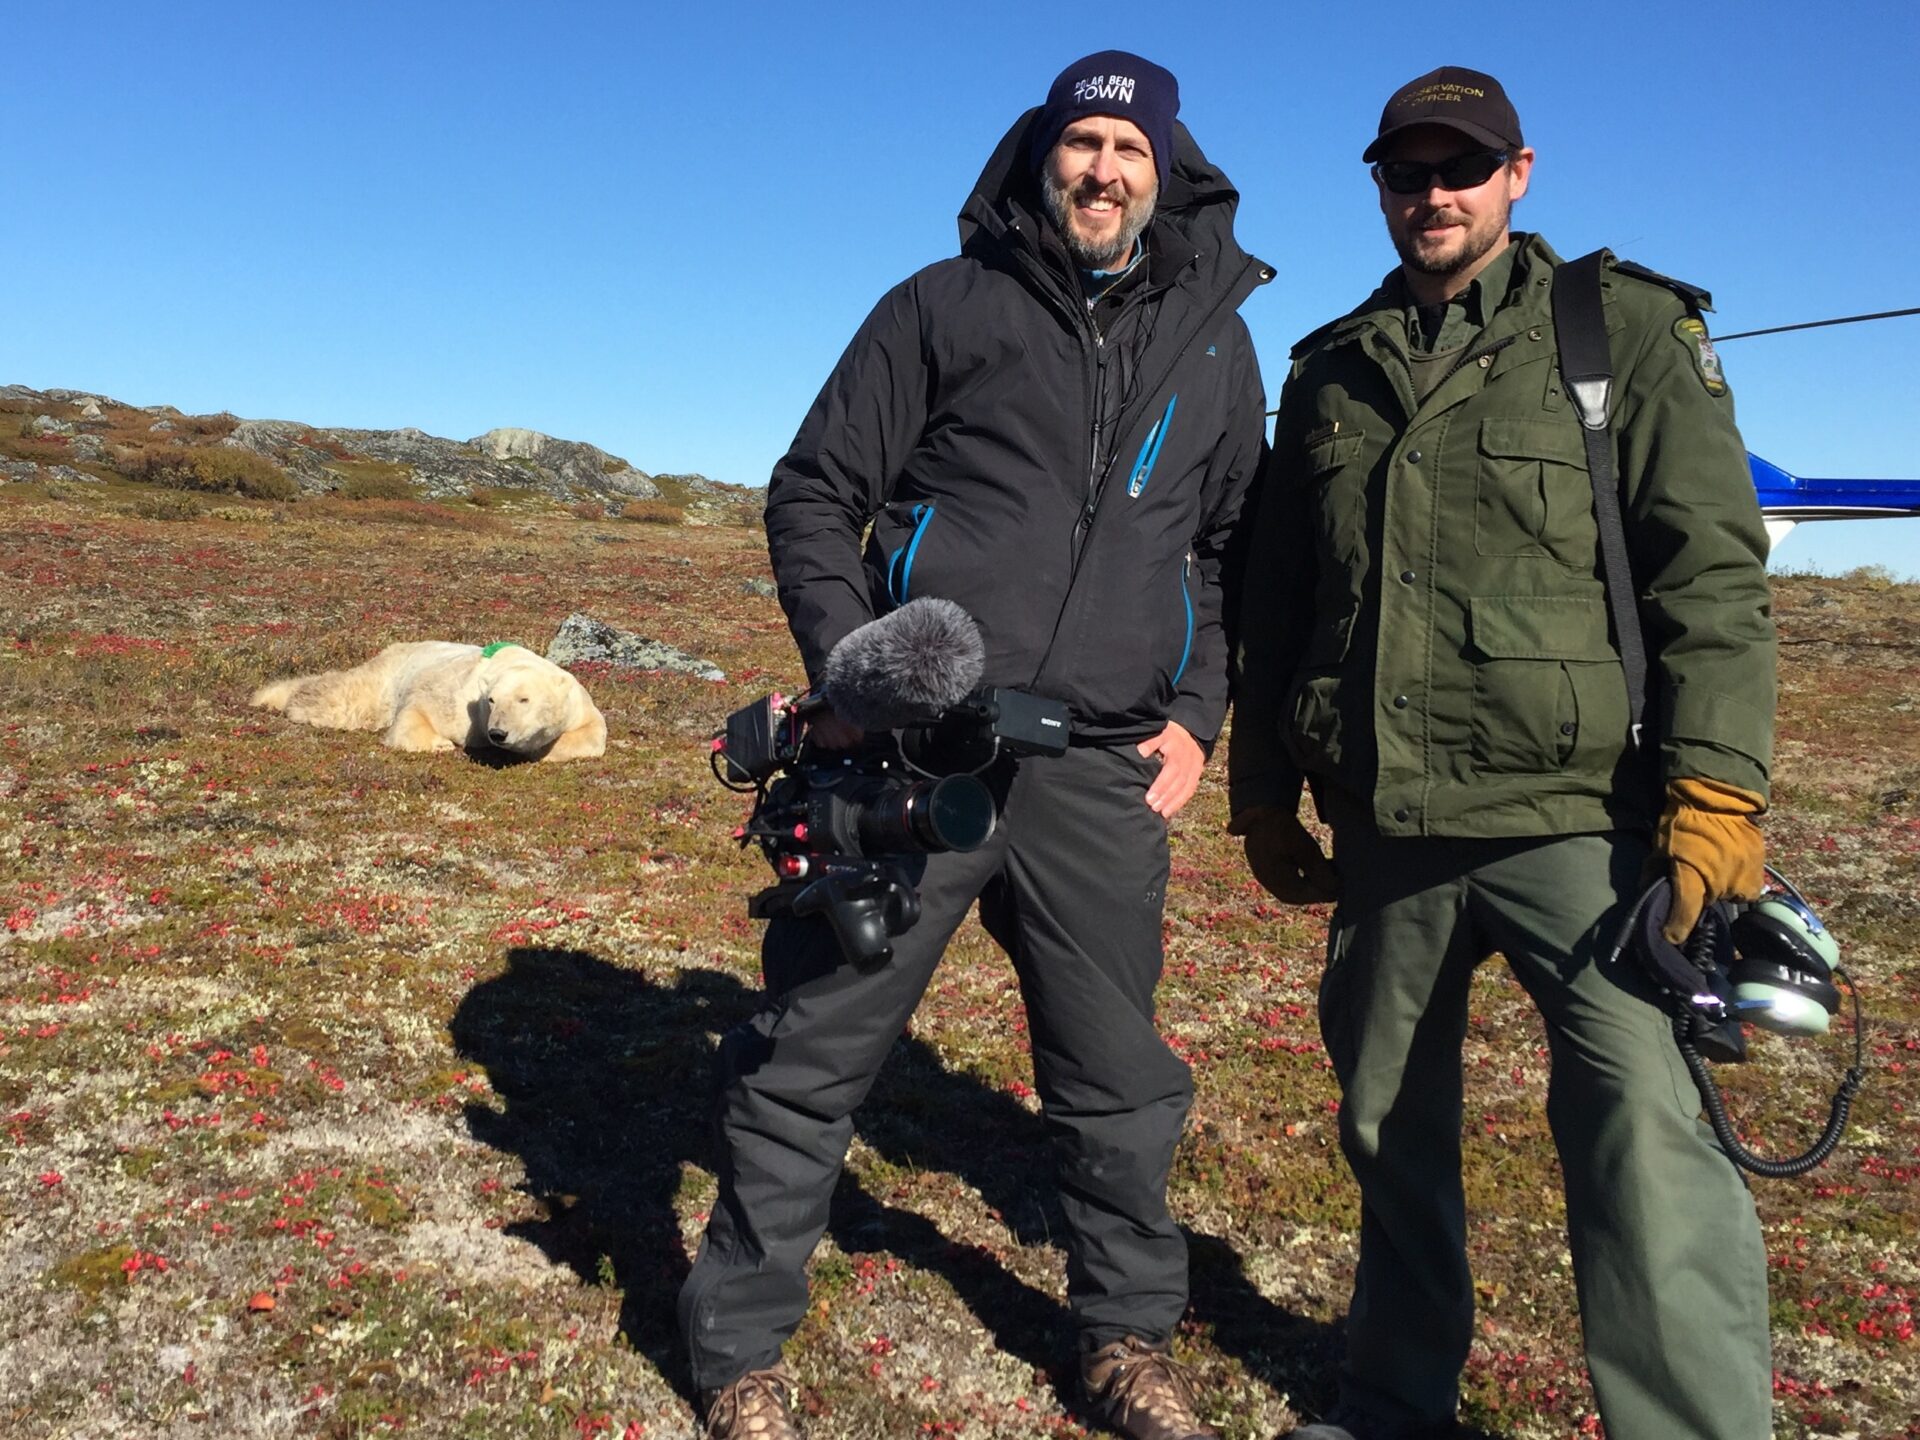 Jeff Newman and a park ranger stand smiling together with a sleepy polar bear in the background.